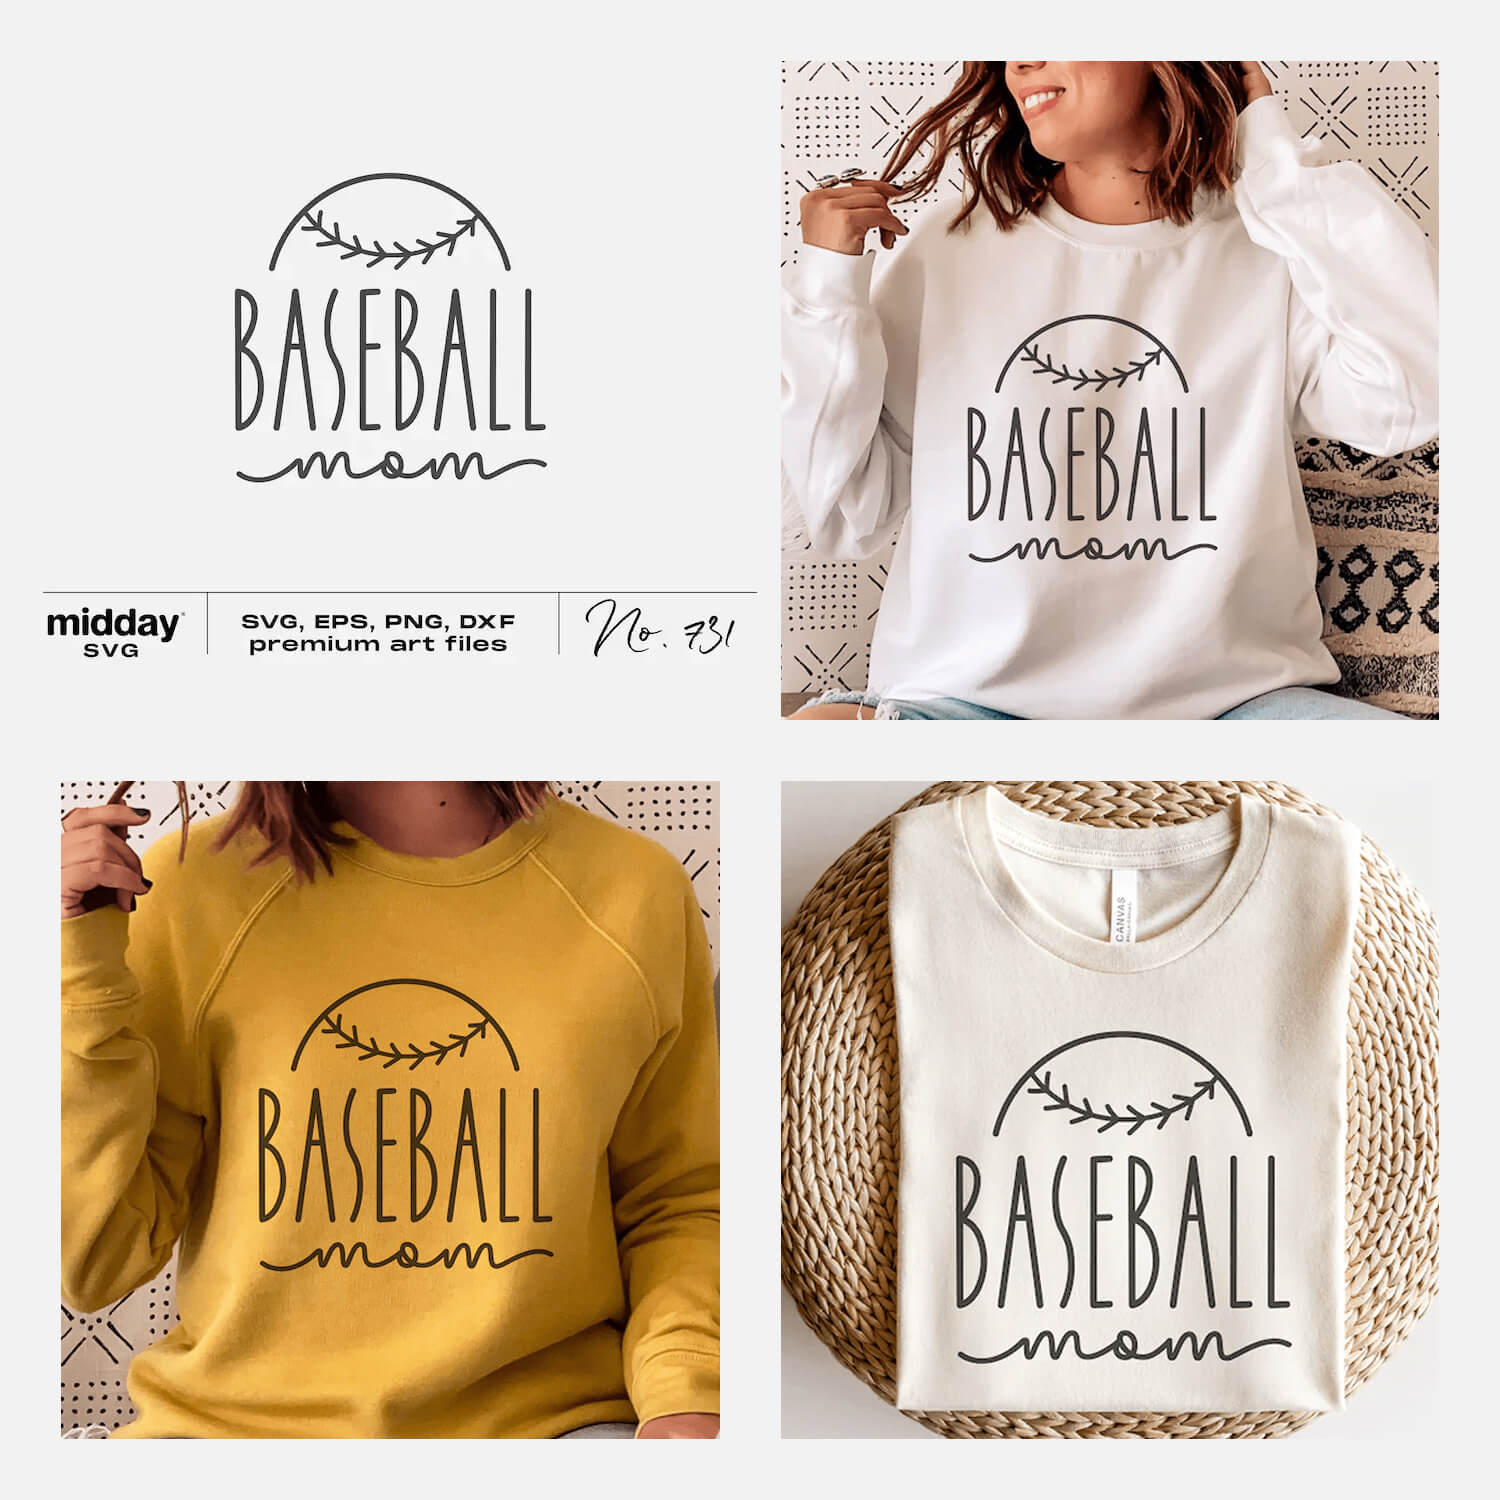 Two sweatshirts white and yellow with prints about baseball on the girls and one white folded.